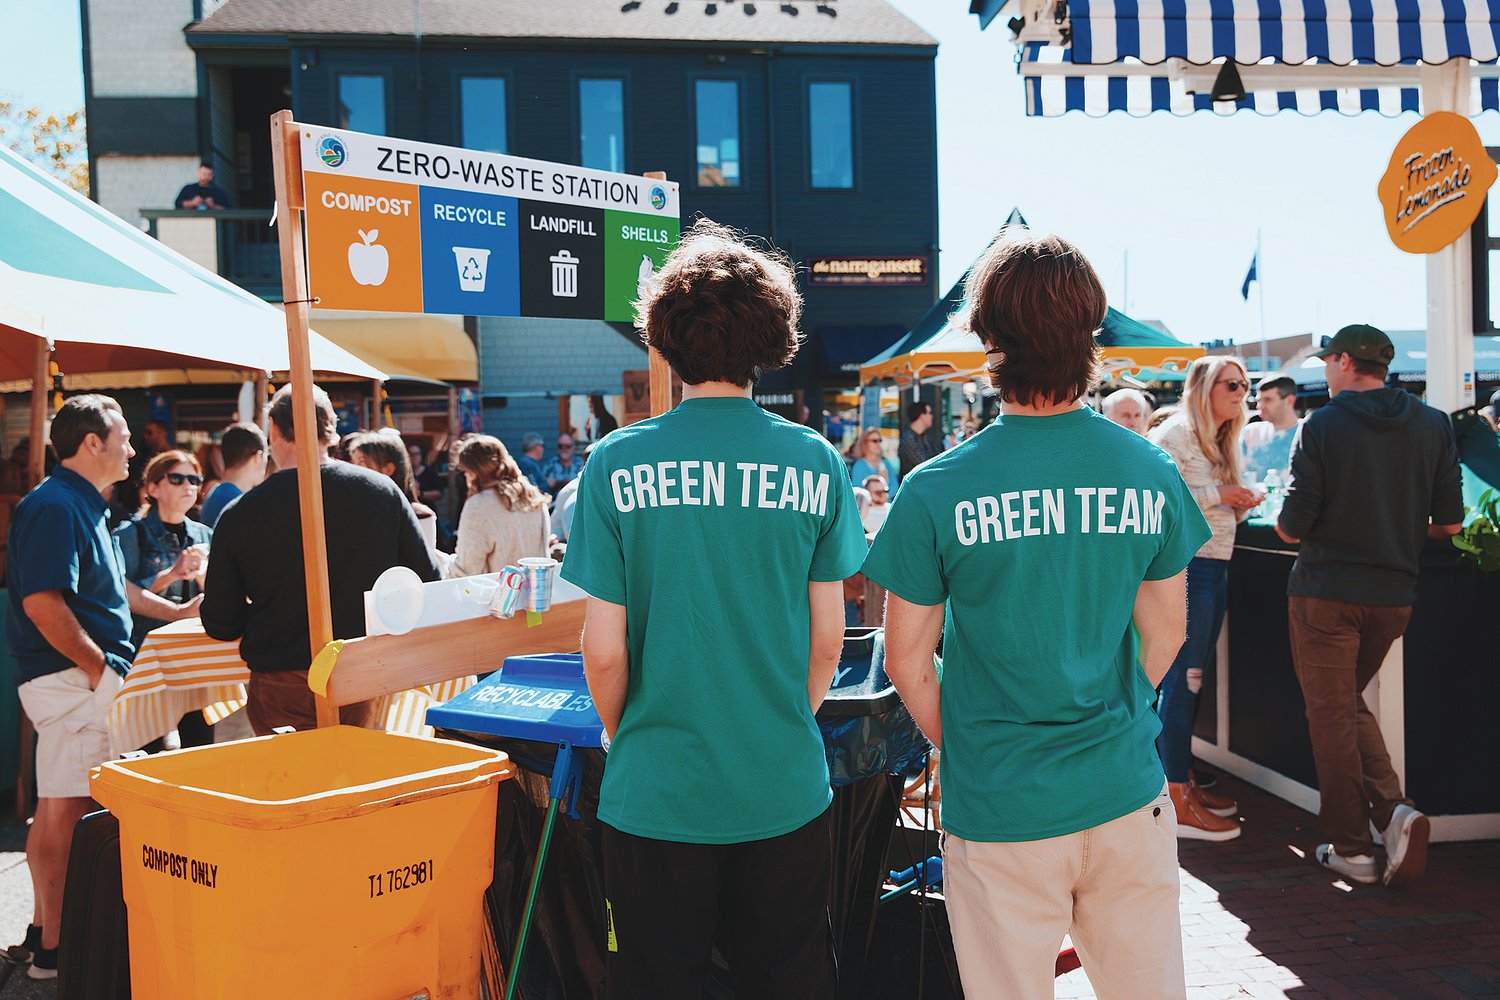 A couple of “Green Team” volunteers monitor a “Zero-Waste Station” at a Newport festival last summer. The event planner and volunteers worked together to separate the thousands of pounds of waste into — literally — separate buckets, so it could go into separate waste streams. Over the course of 15 such events, Clean Ocean Access was able to divert more than 26,000 pounds of waste from Rhode Island’s central landfill.